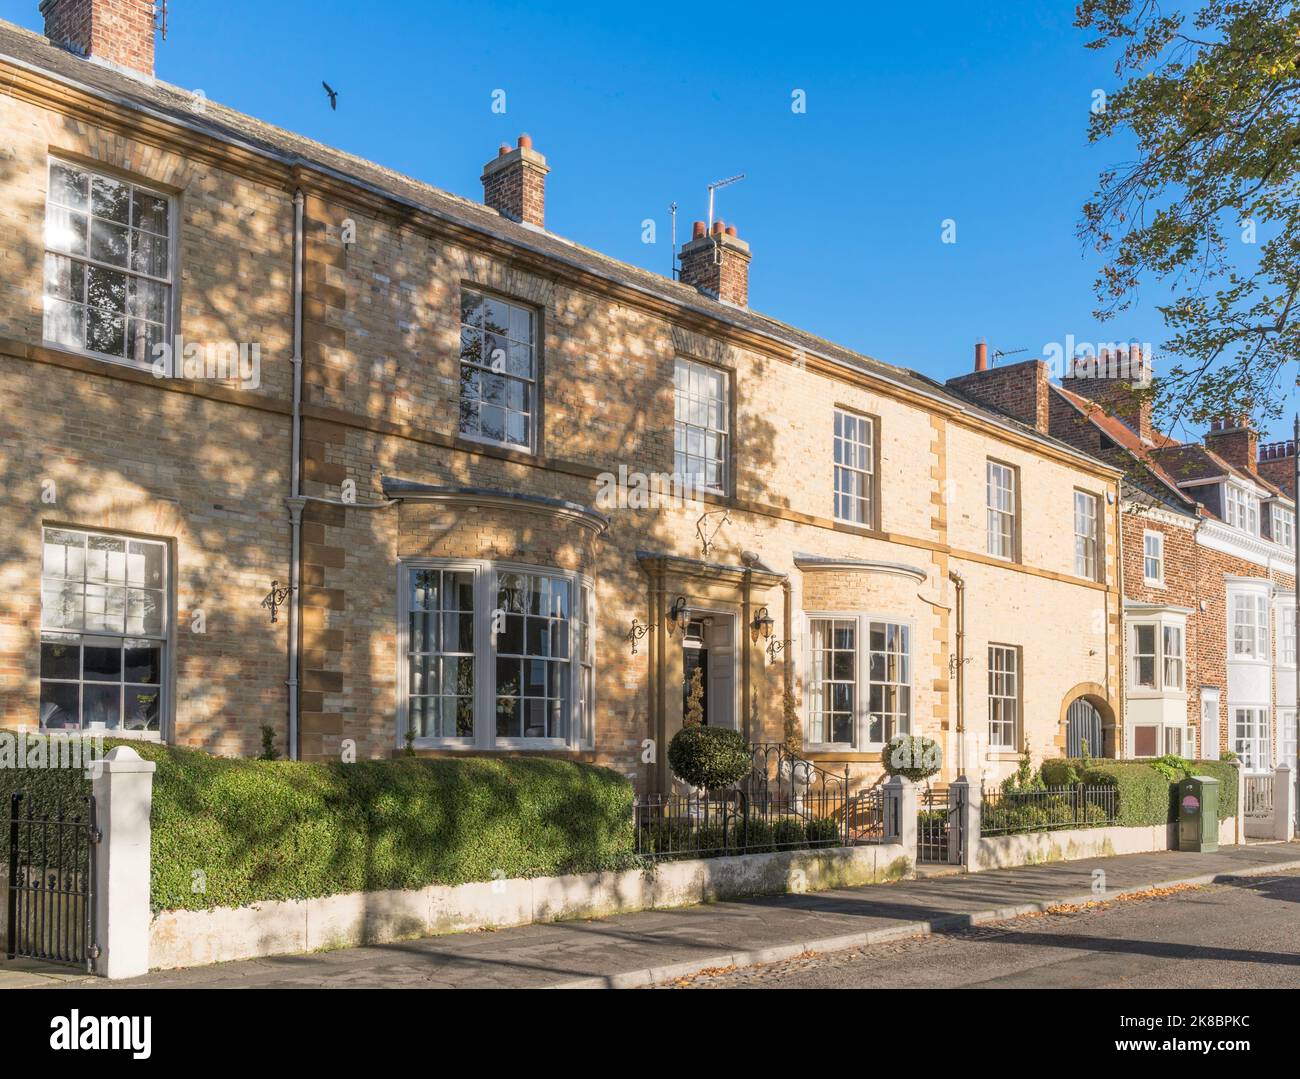 The listed Stokesley House, 2 West Green, Stokesley North Yorkshire, England, UK, Foto Stock